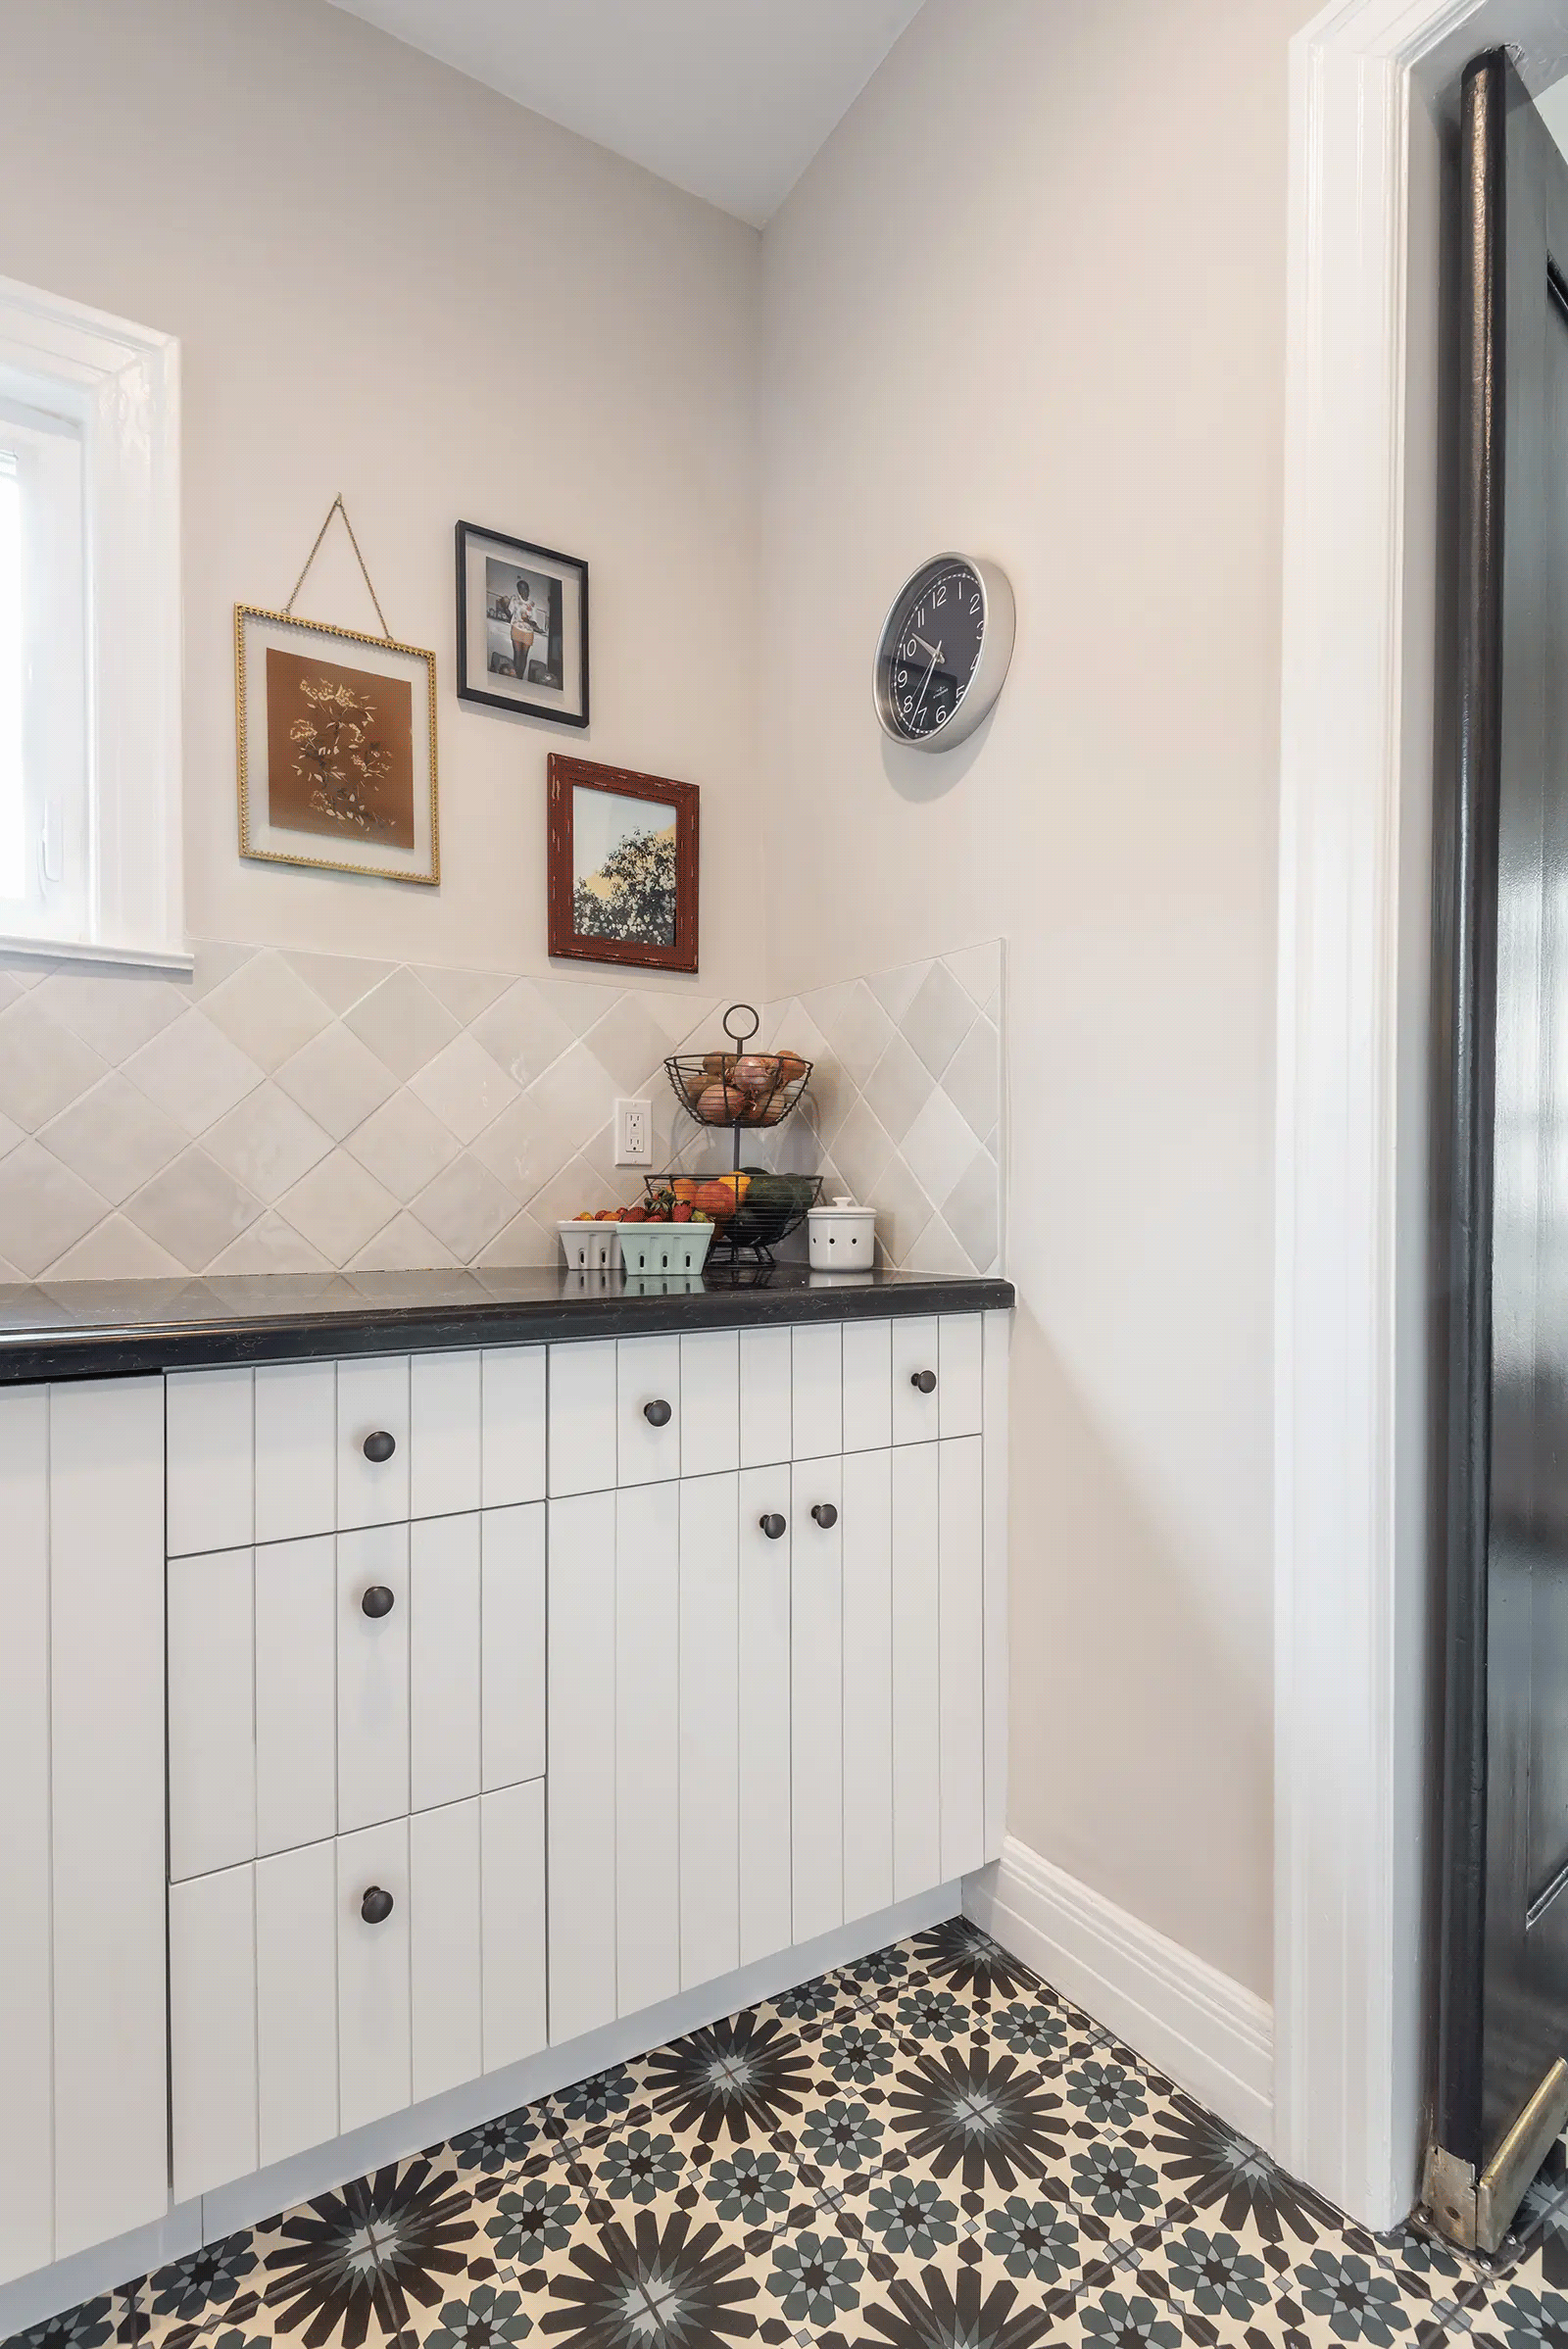 white beadboard cabinet doors with black hardware and pull out drawers in kitchen remodel